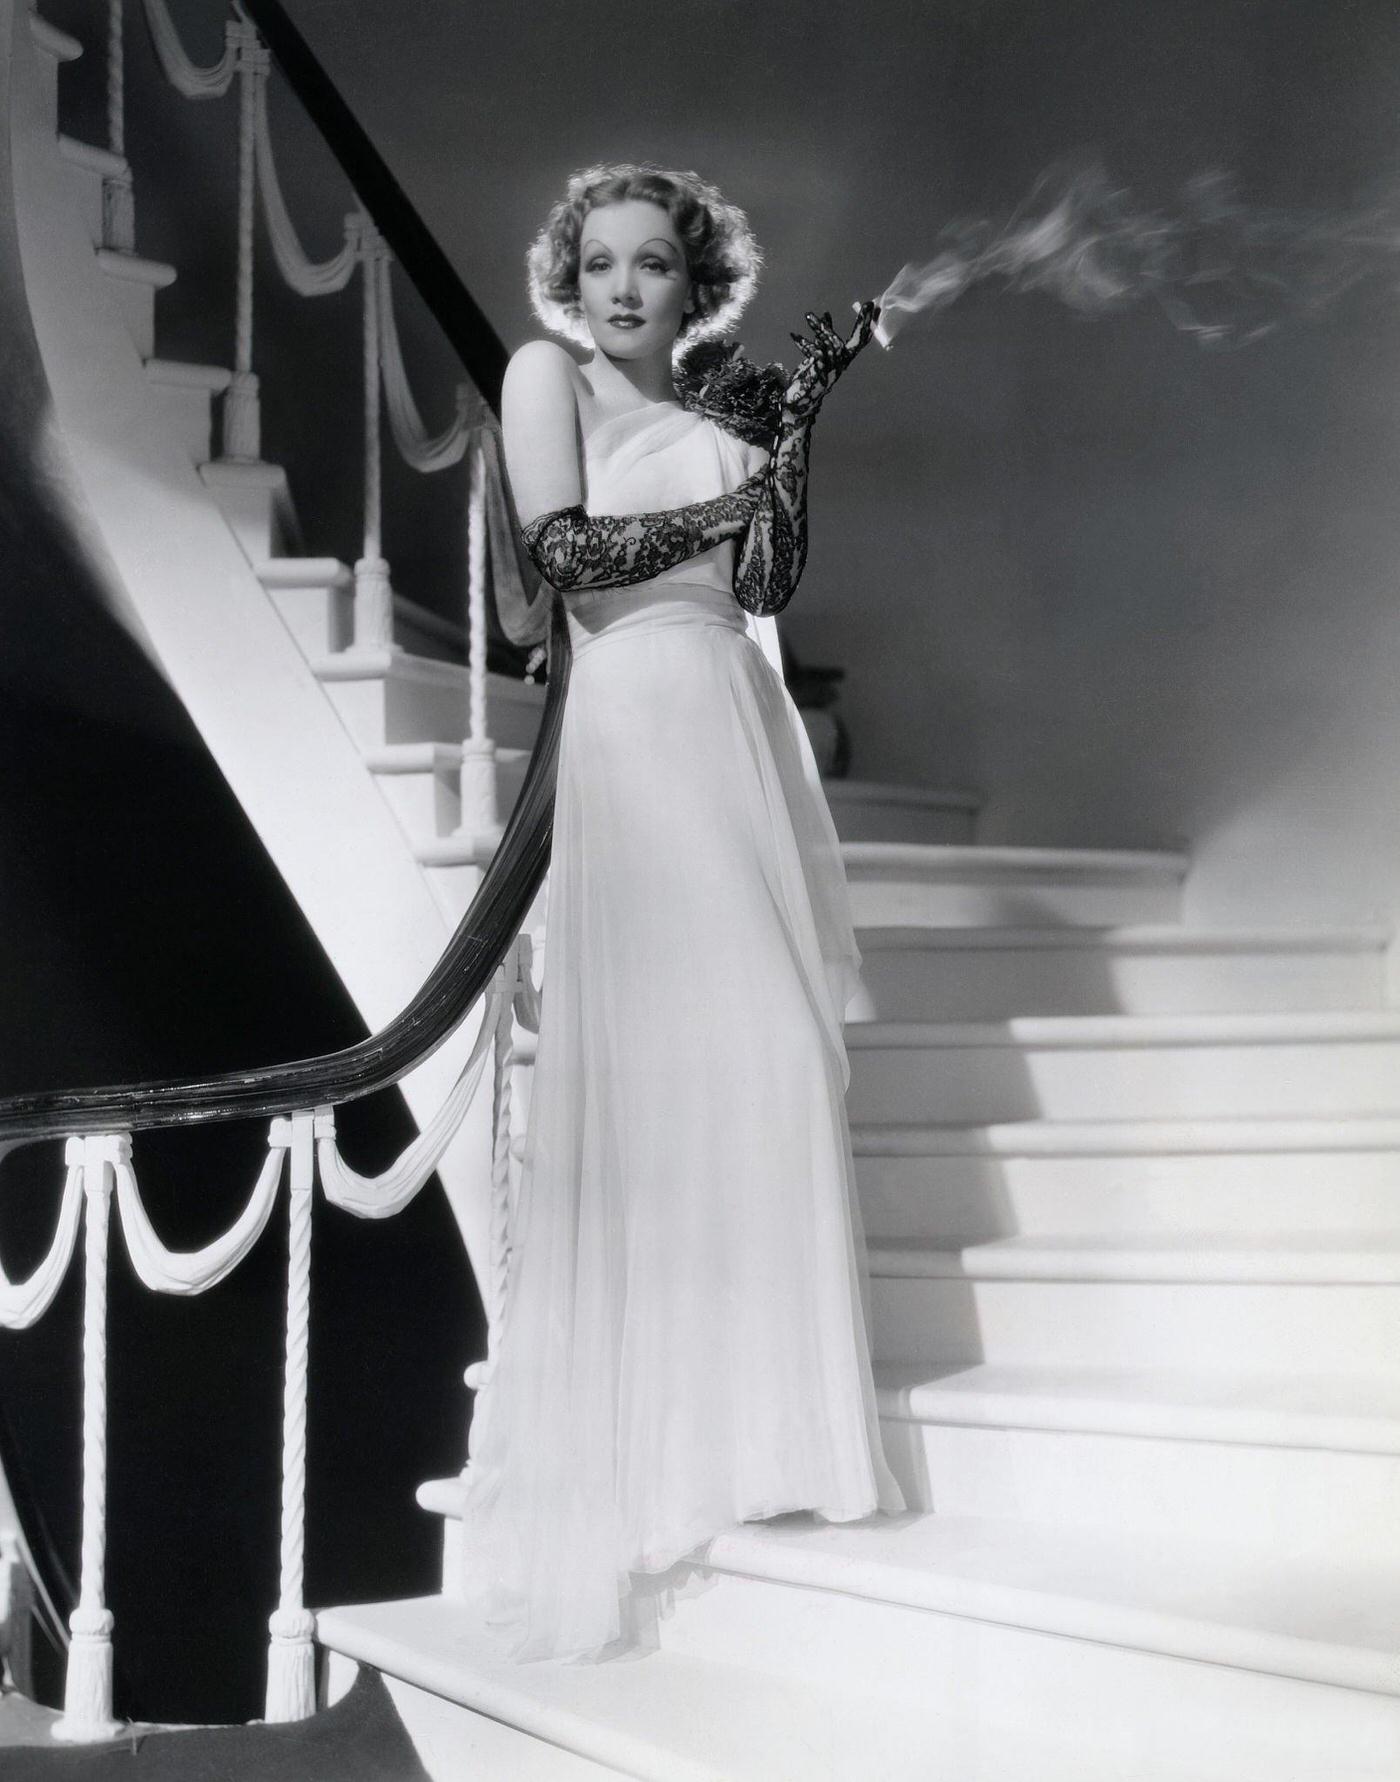 Marlene Dietrich is captured smoking on a staircase.